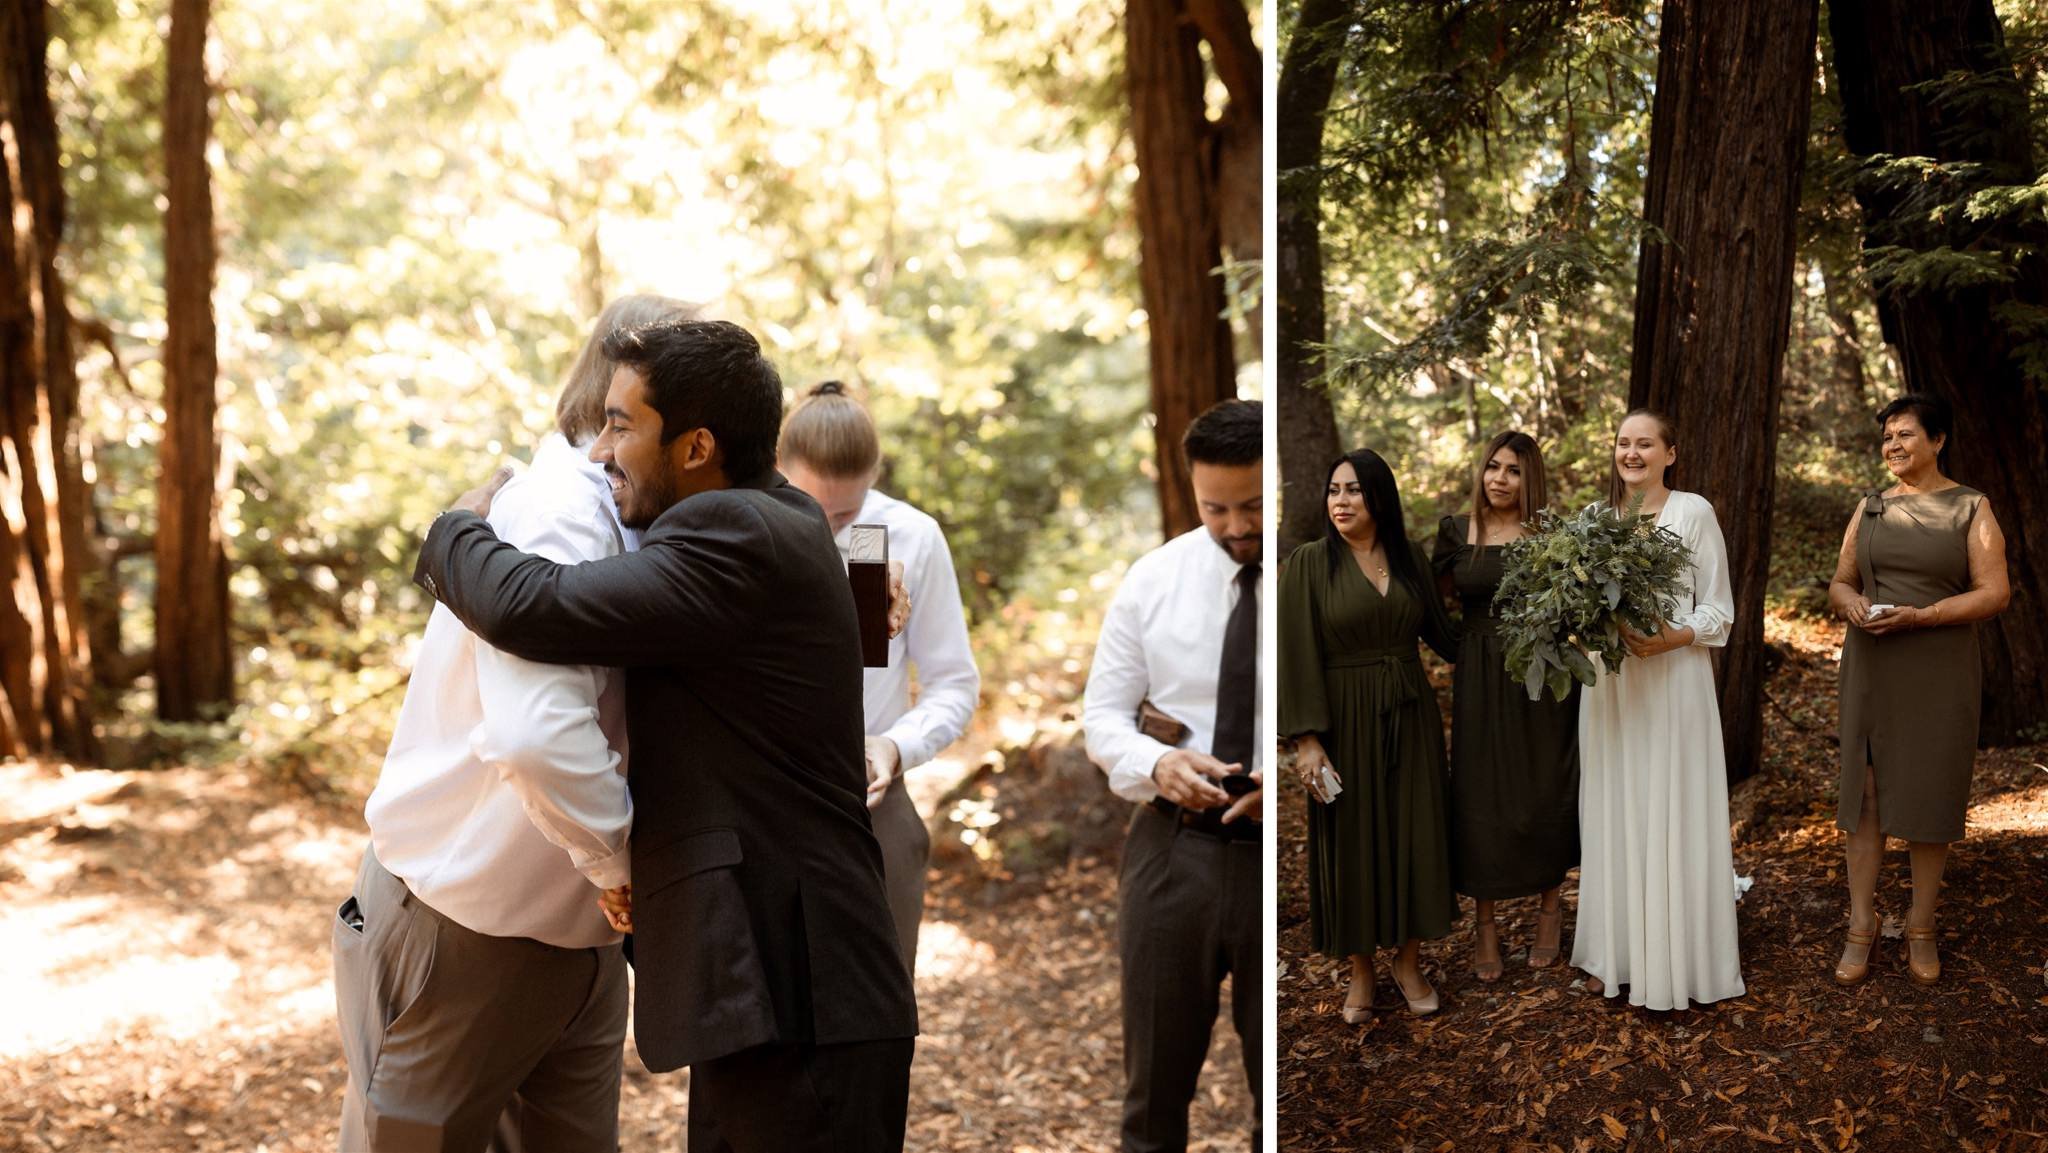 059_Two-Day Big Sur Redwoods Elopement with Family_Will Khoury Elopement Photographer.jpg